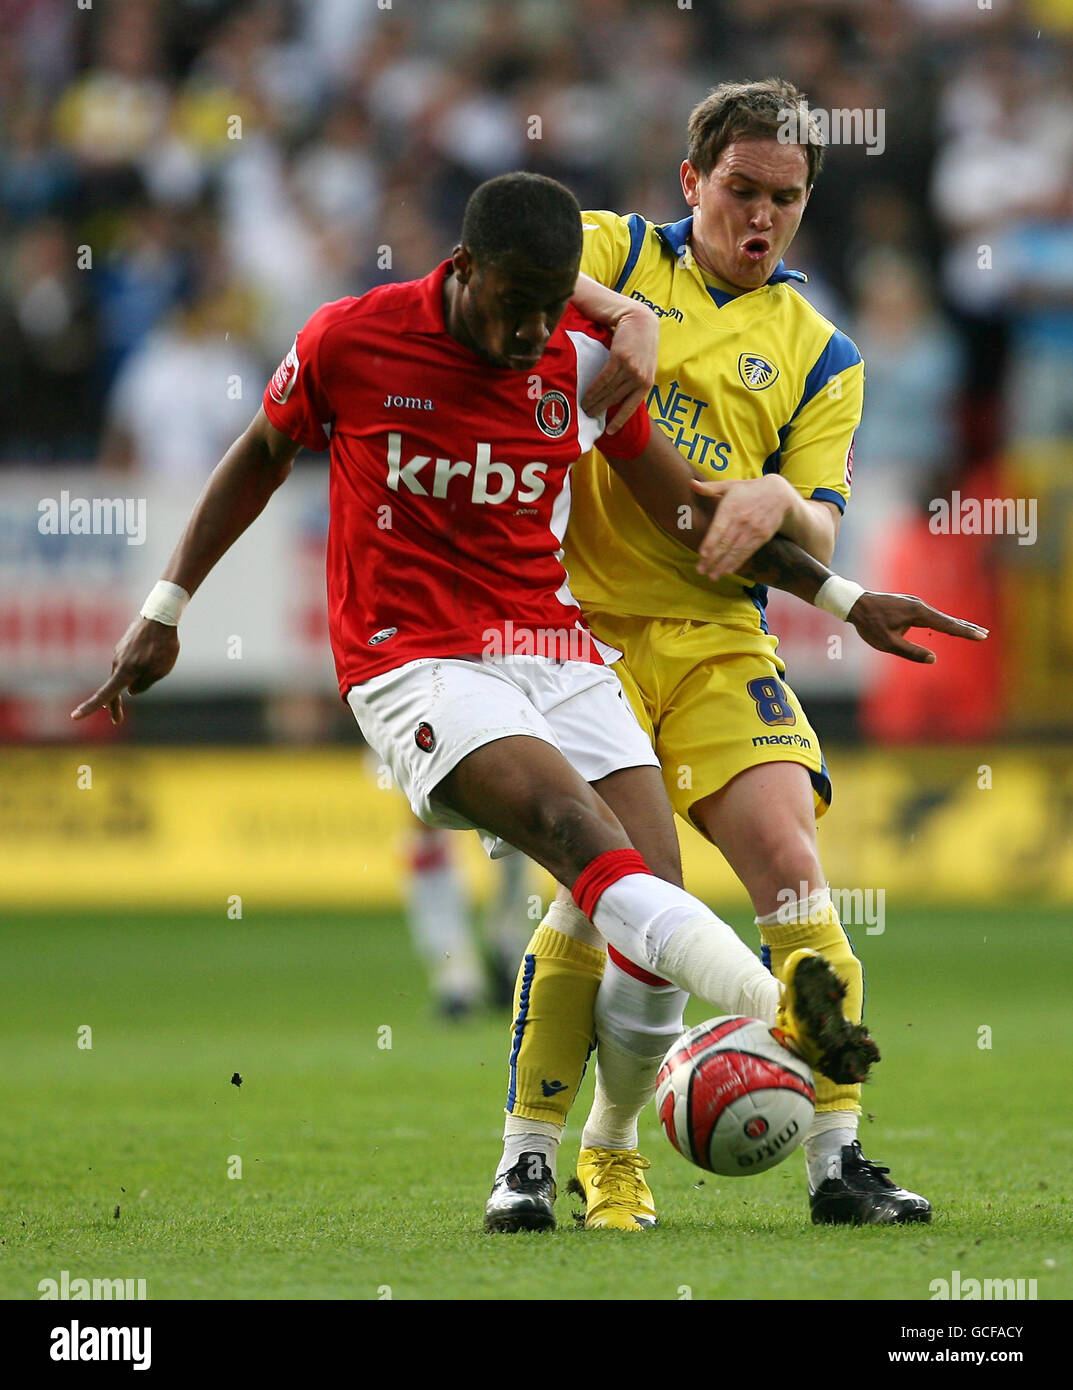 Charltons' Sam Sodje holds off a tackle from Leeds' Neil Kilkenny (right) during the Coca-Cola League One Match at The Valley, London. Stock Photo